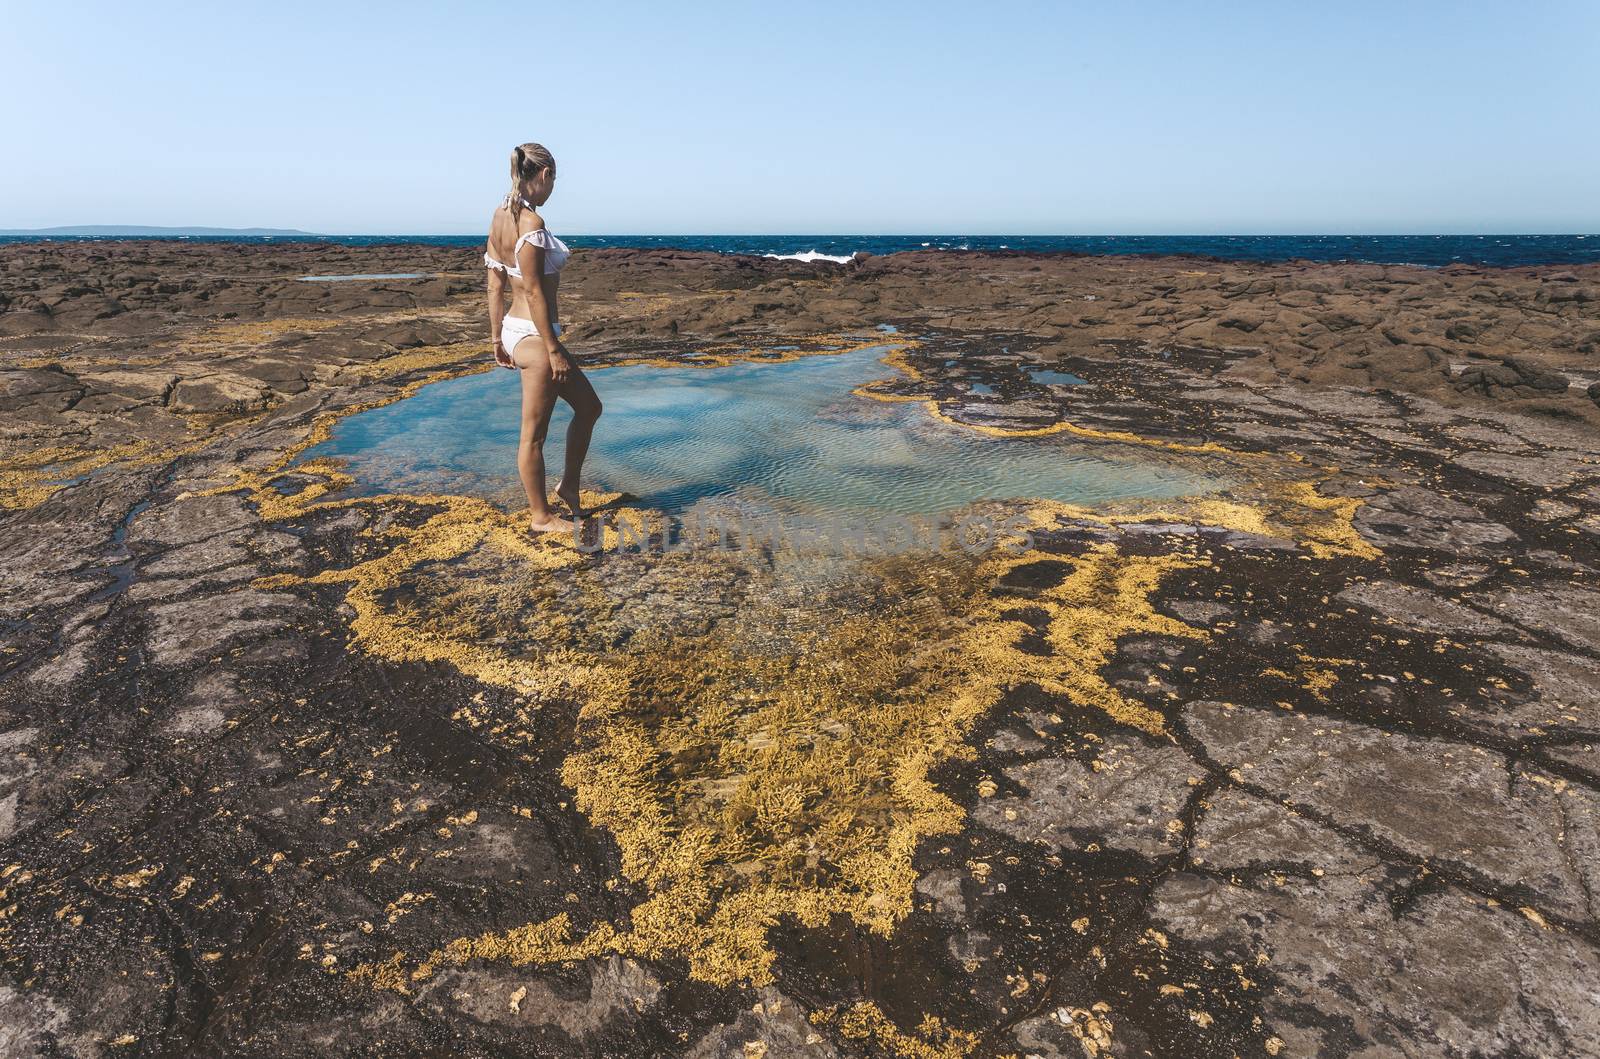 A woman stands by a small rockpool on the coastal rock shelf which is lined with a pretty yellow seaweed.